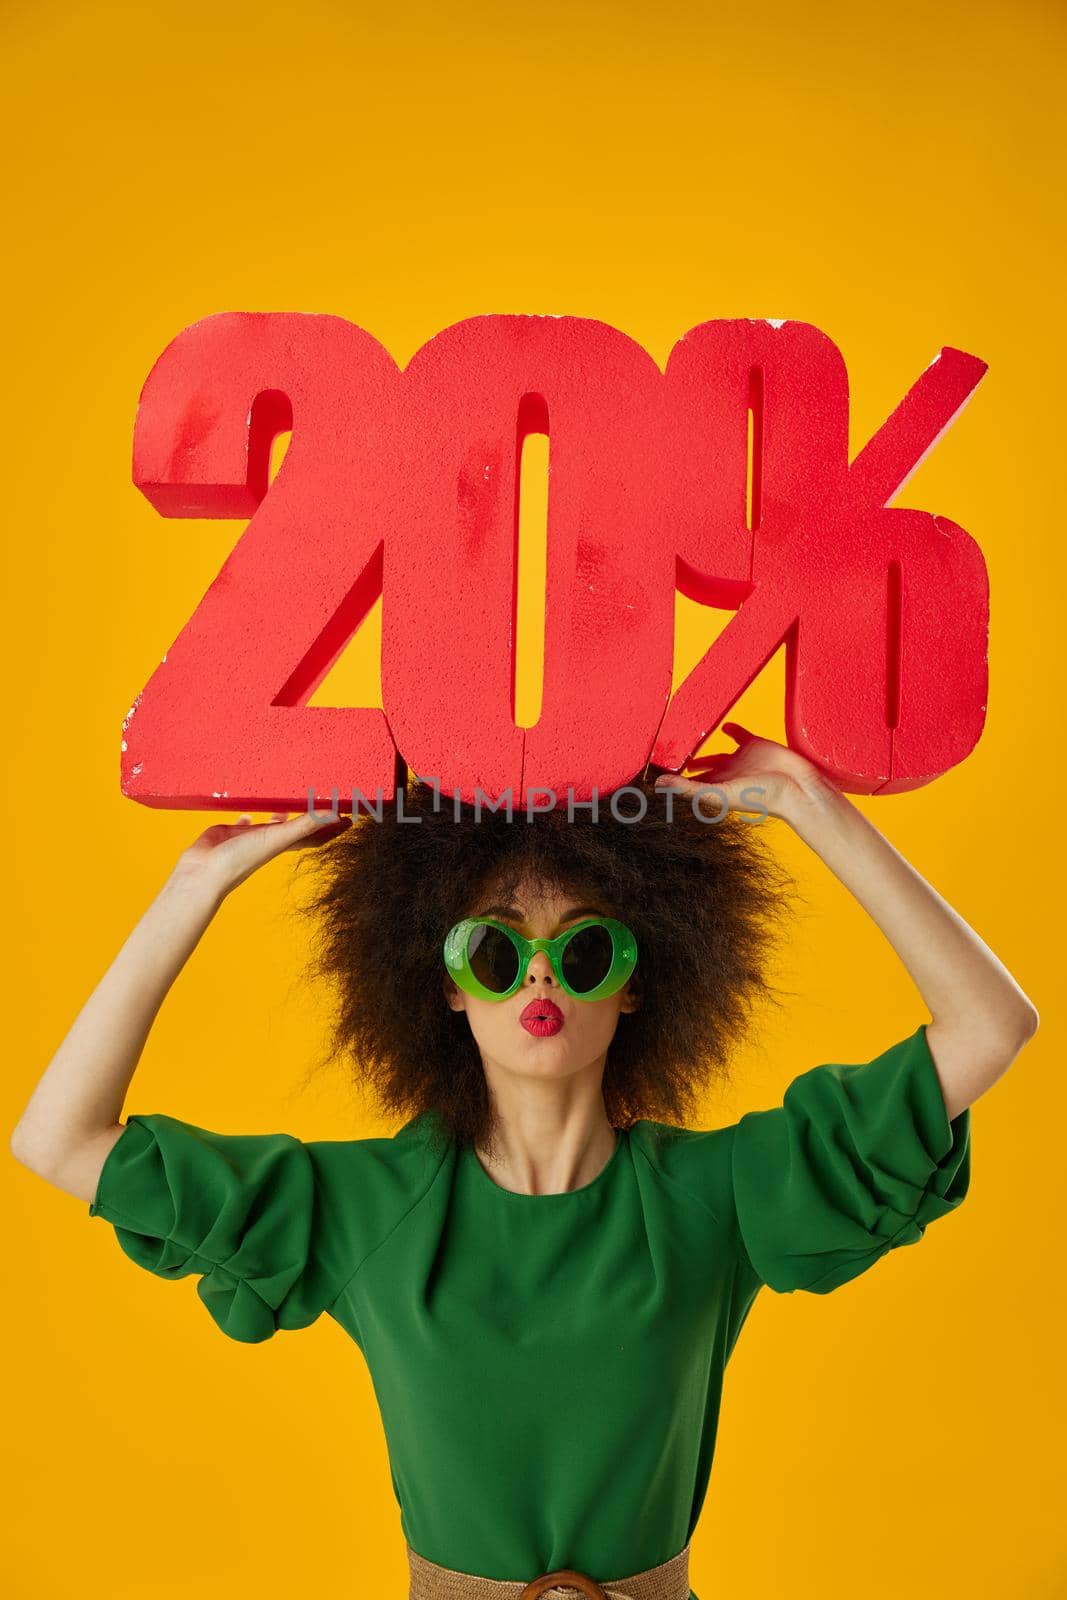 Pretty young female curly hairstyles green dress twenty percent discount yellow background unaltered. High quality photo